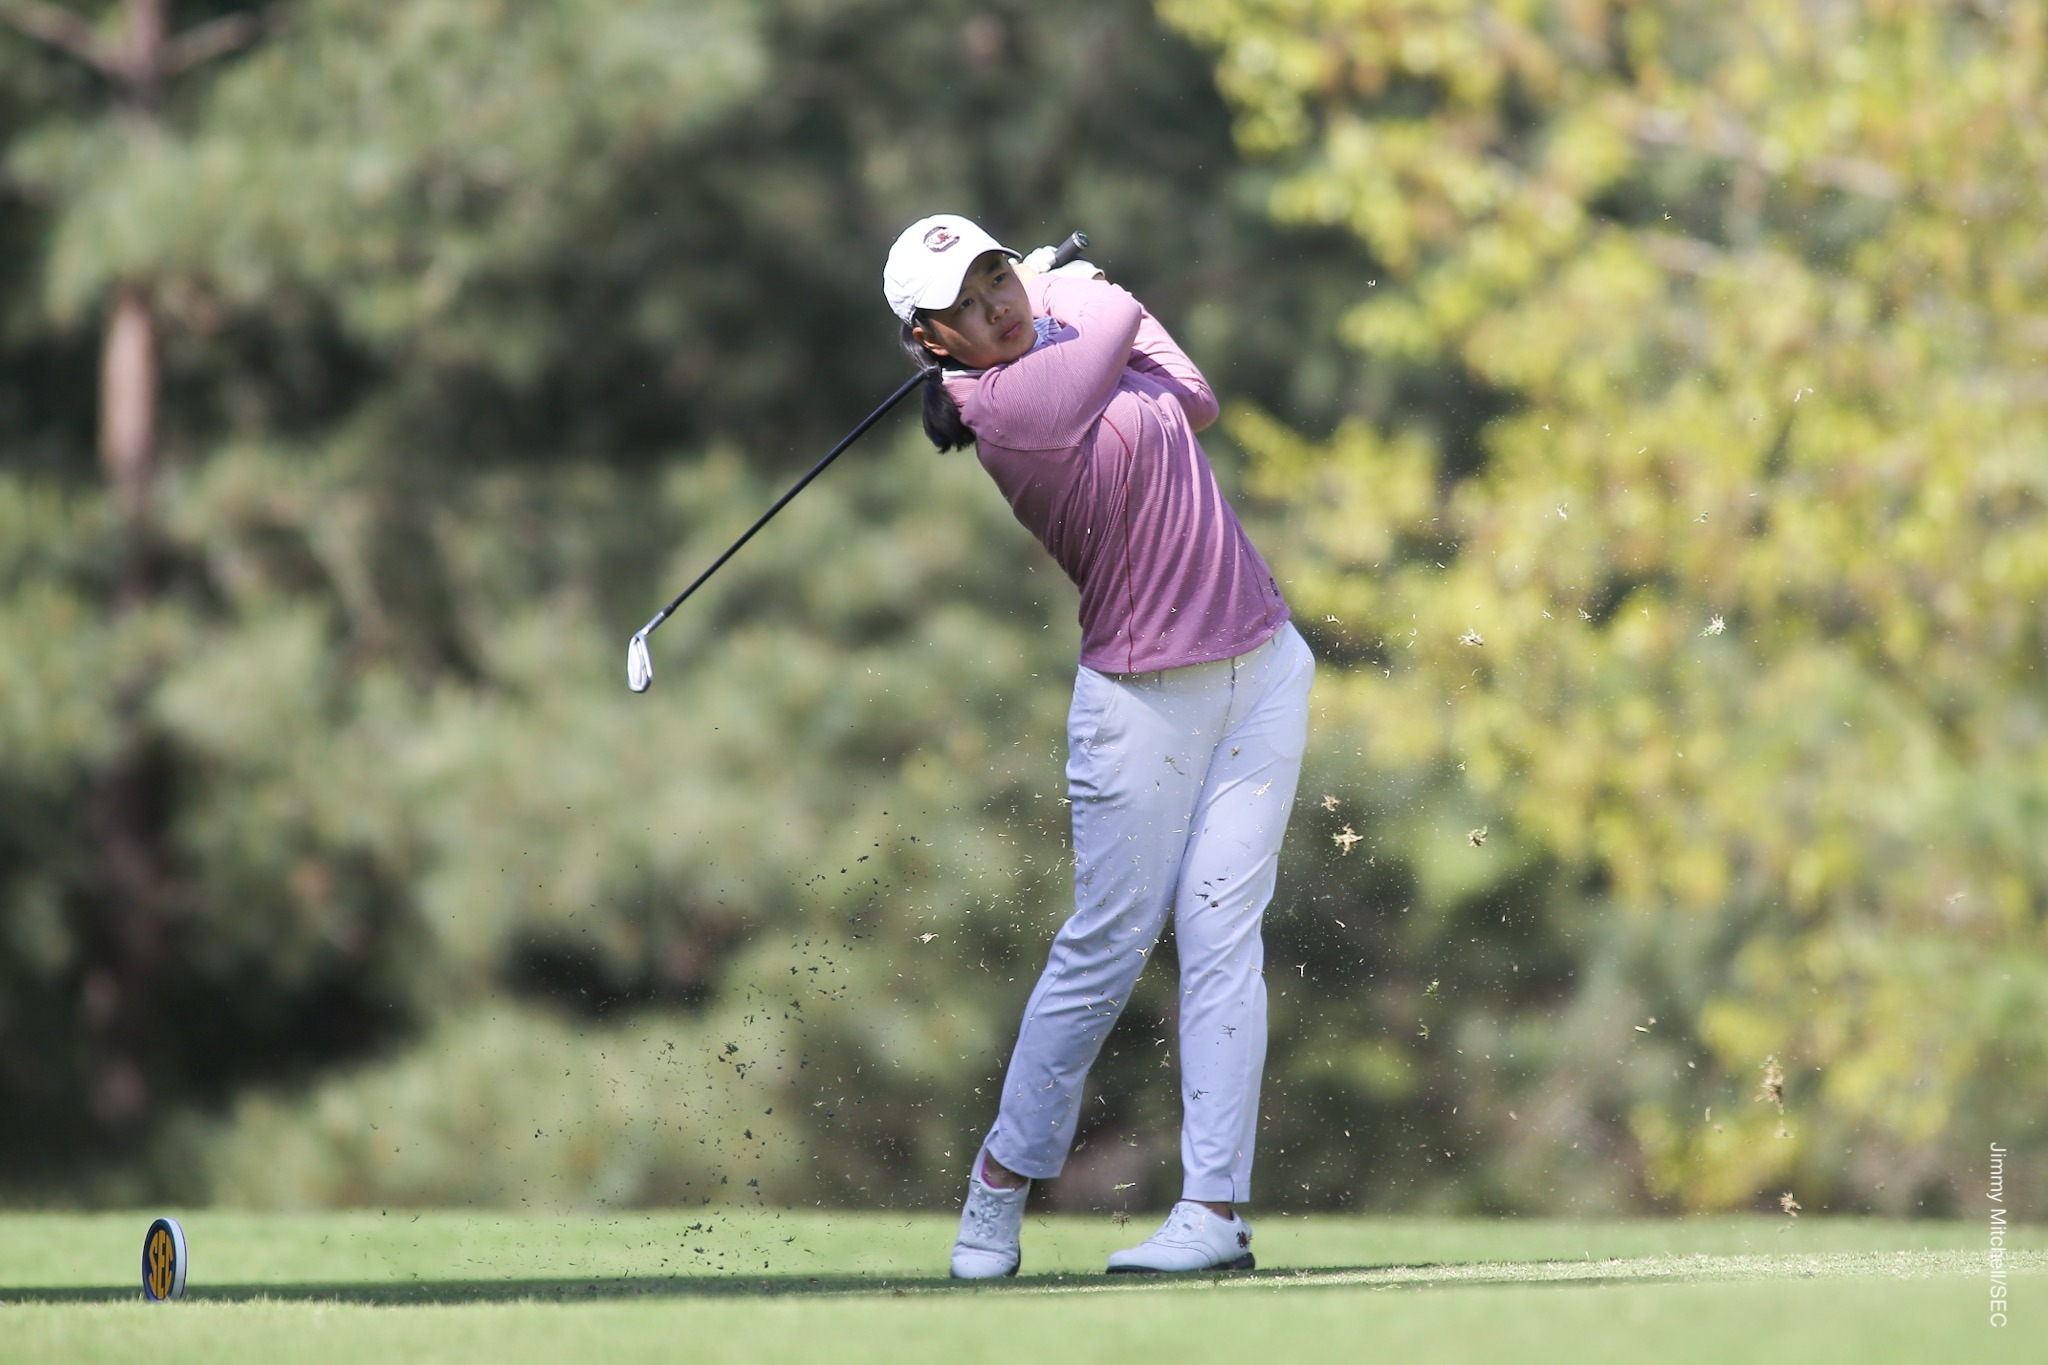 Gamecocks in Eighth at Windy City Collegiate Classic